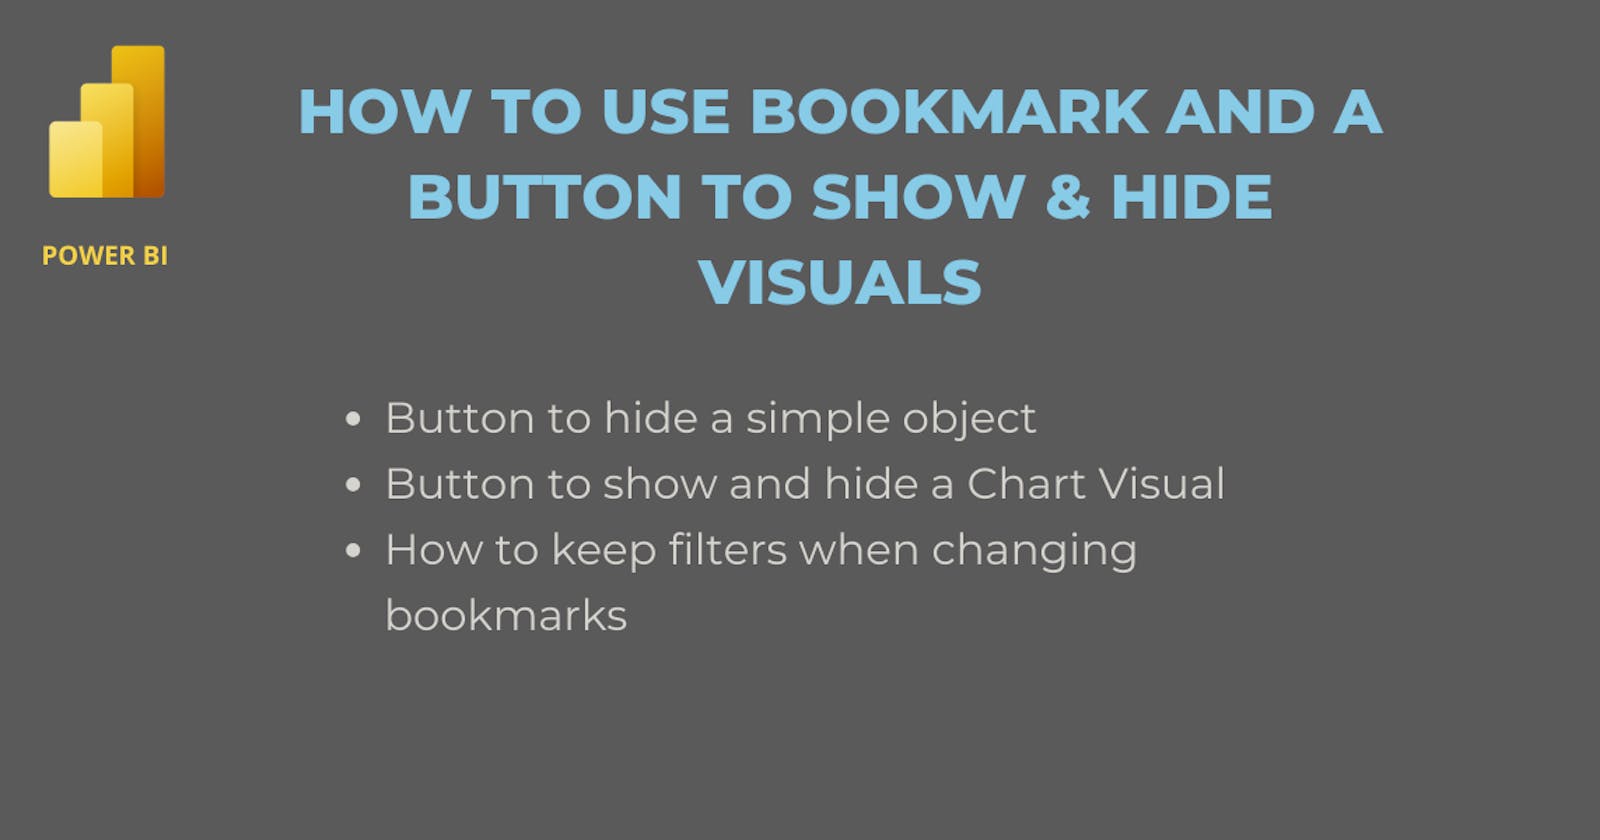 How to use a bookmark and a button to show & hide visuals (and other bookmark magic tricks).